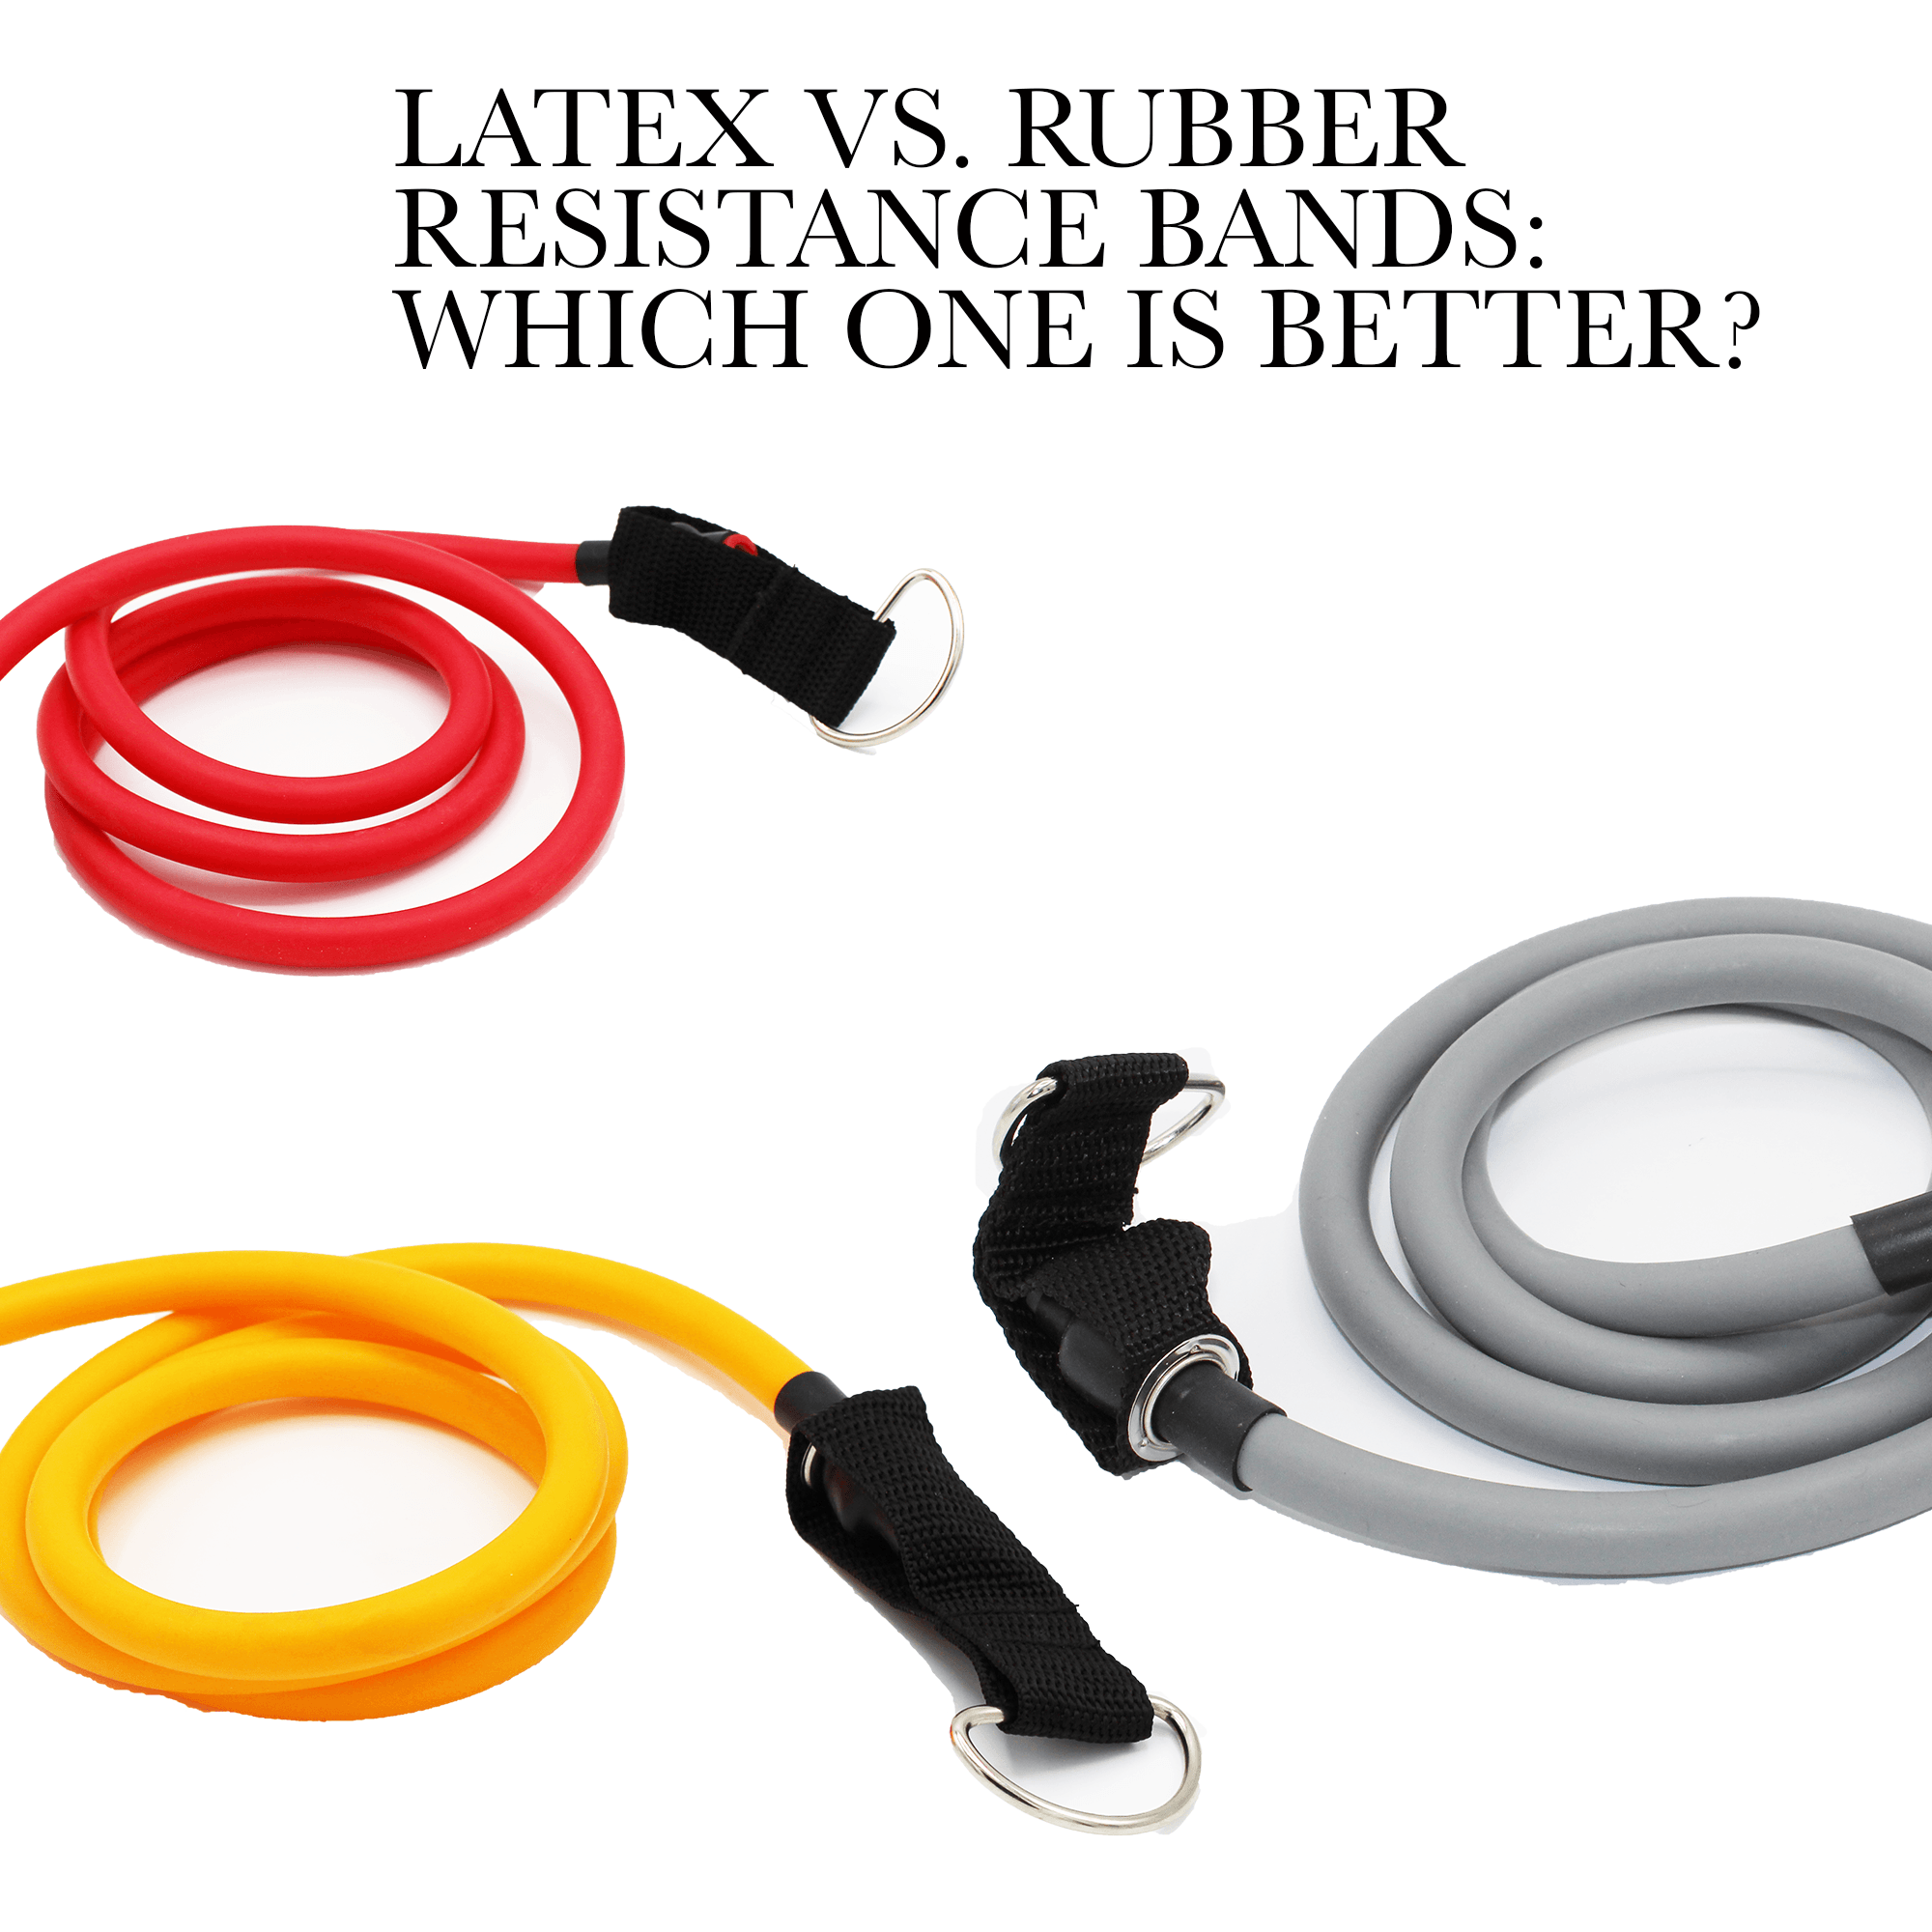 Latex vs. Rubber Resistance Bands: Which one is better? – Fitness